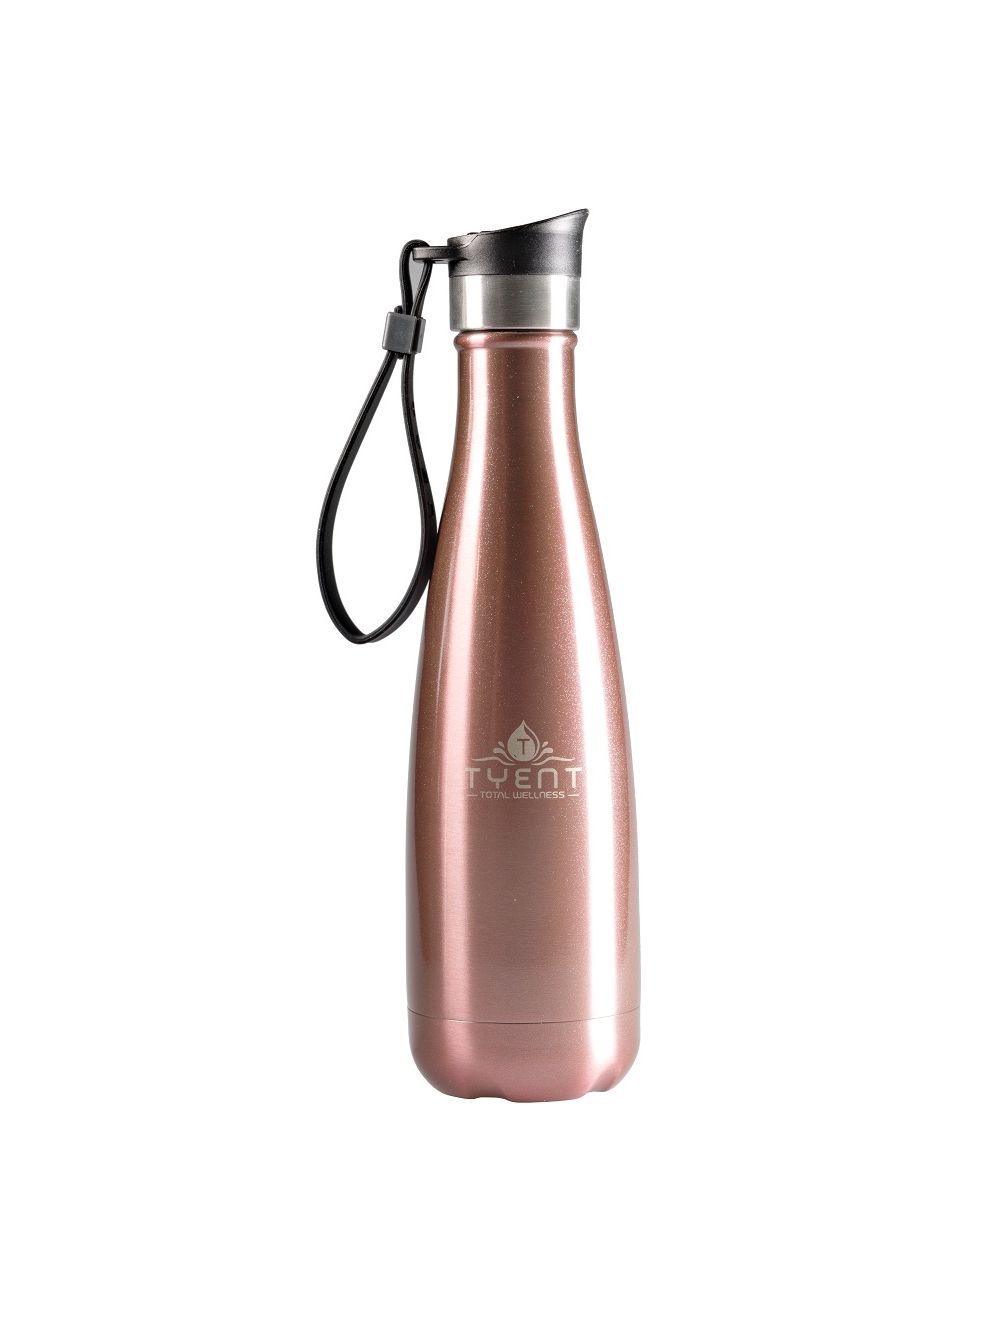 NTA Stainless Steel Water Bottle - Nutritional Therapy Association